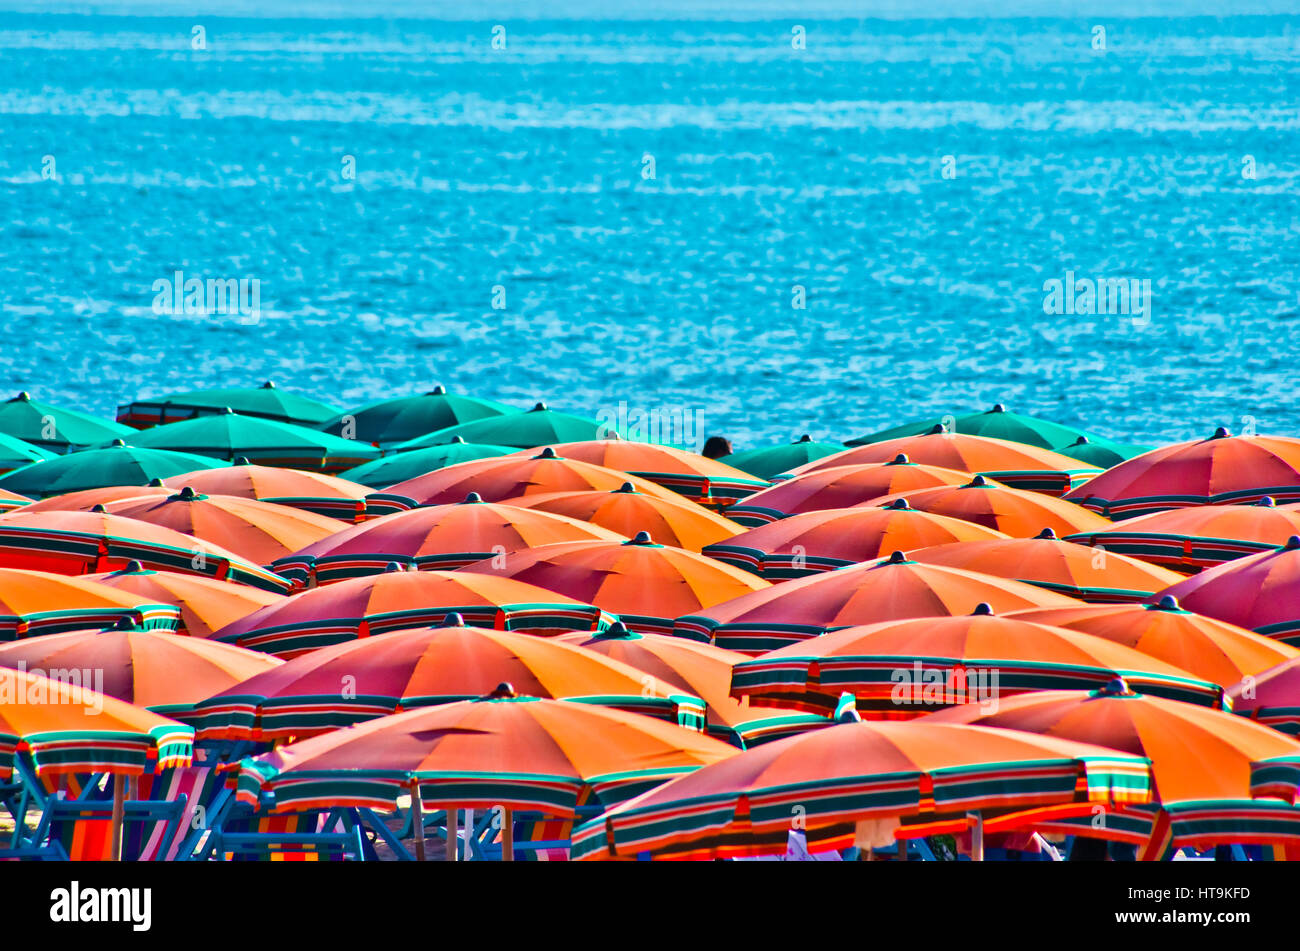 orange umbrellas in summer with blue sea in the background Stock Photo